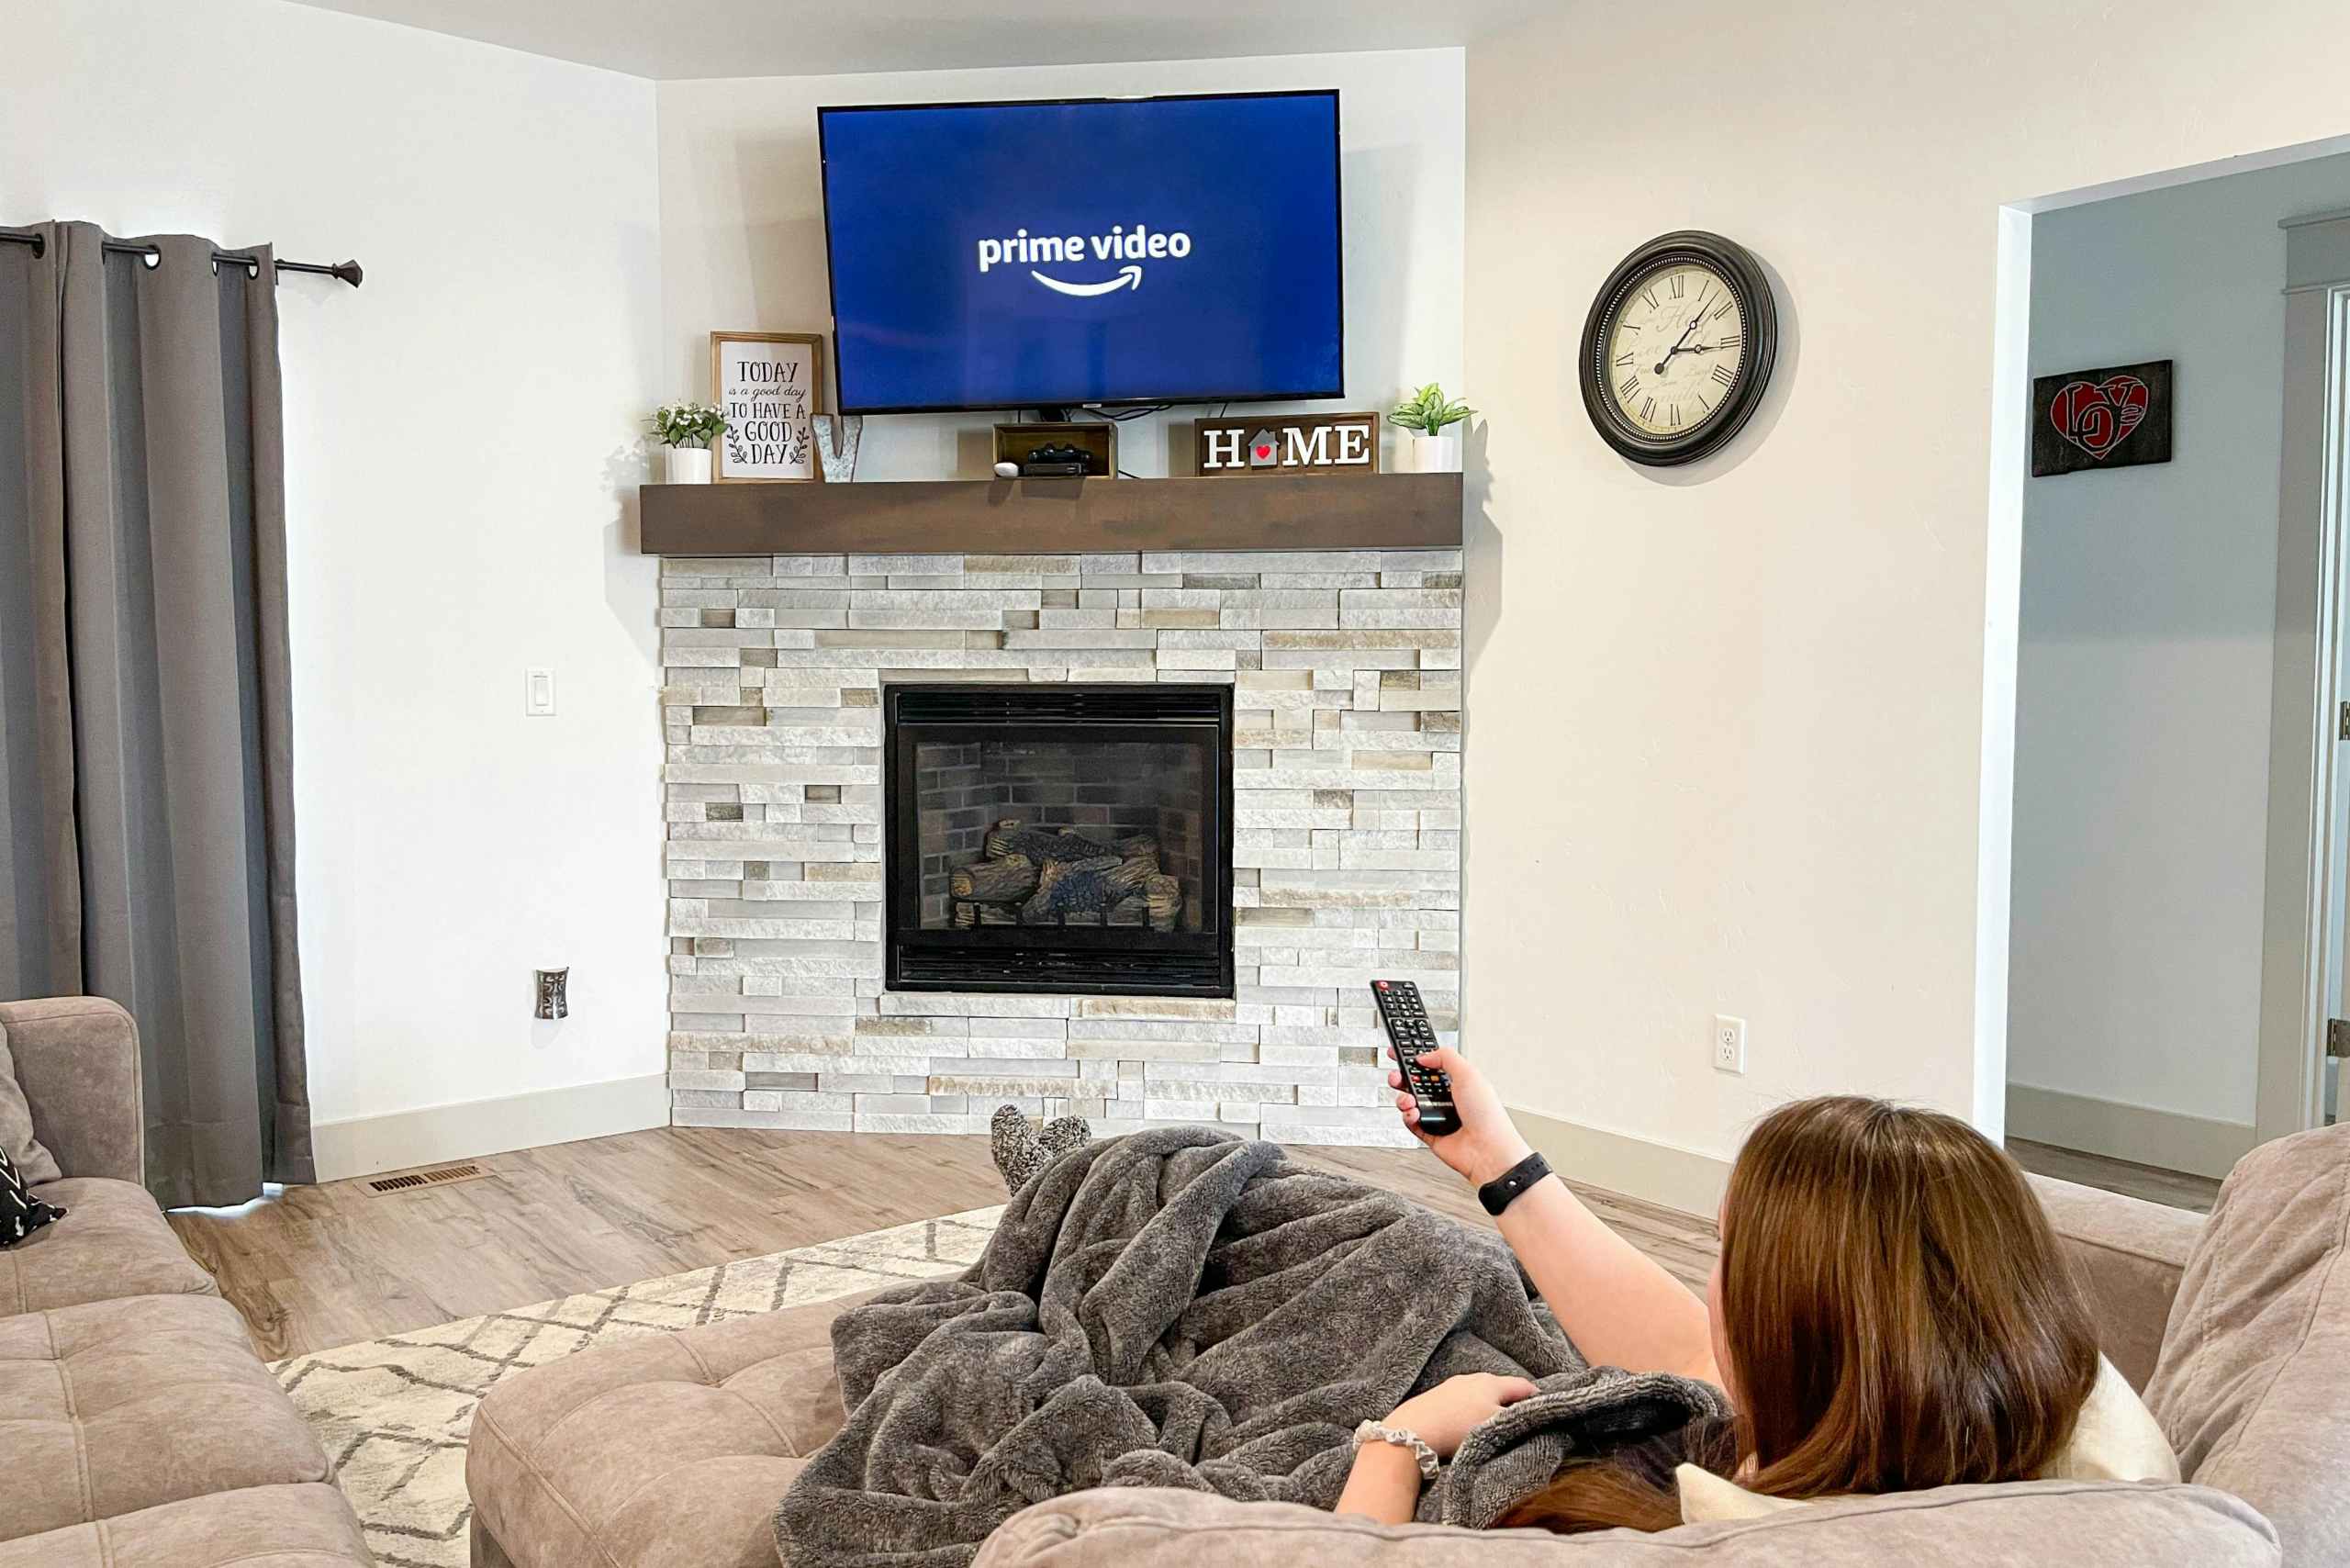 Someone sitting on a couch, pointing a remote at a TV with the Amazon prime video app opening